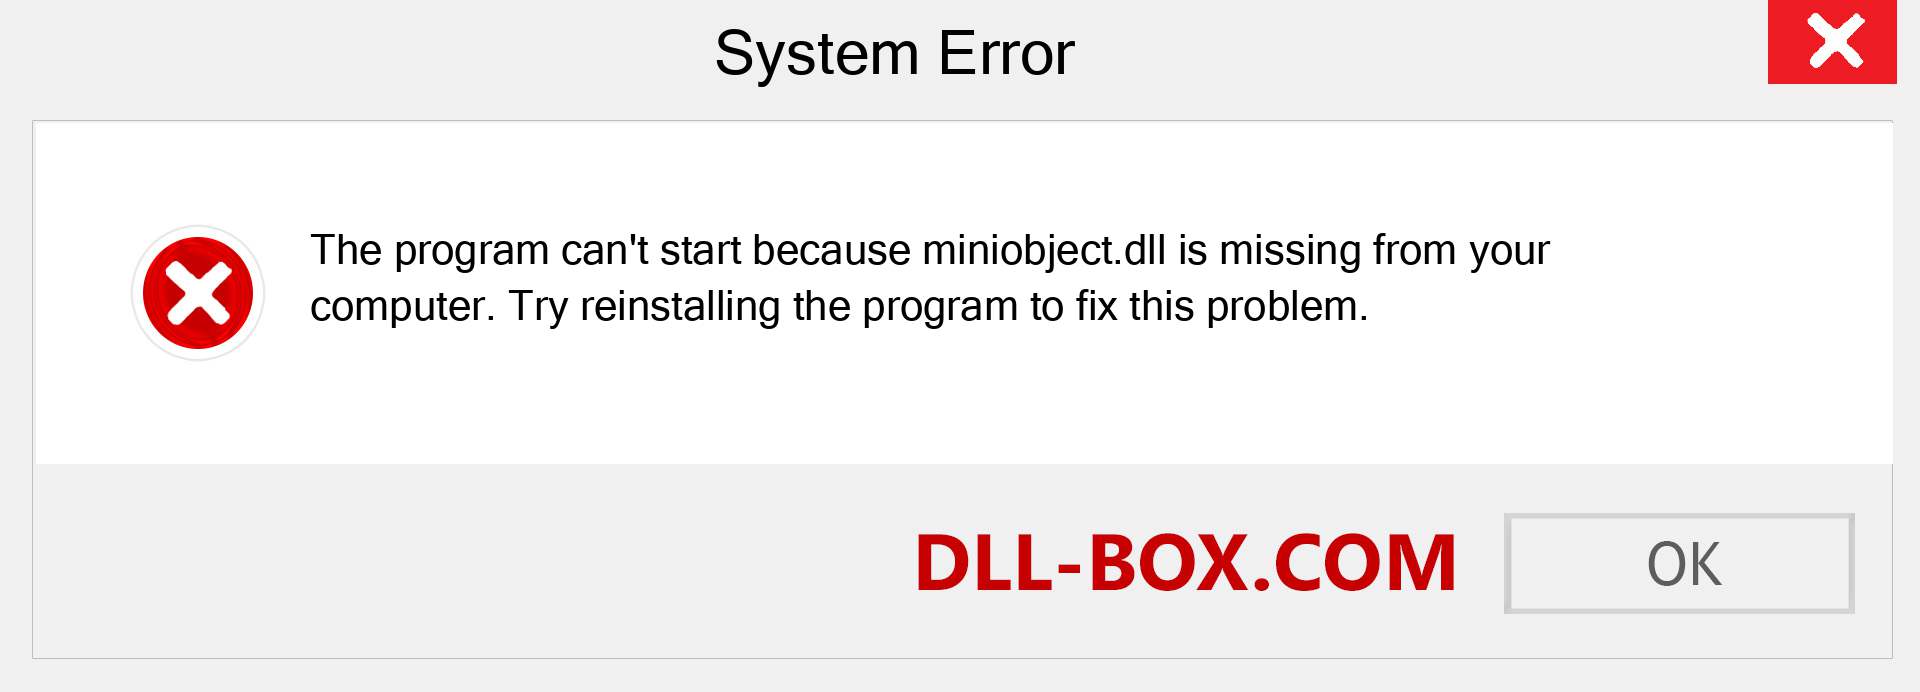  miniobject.dll file is missing?. Download for Windows 7, 8, 10 - Fix  miniobject dll Missing Error on Windows, photos, images